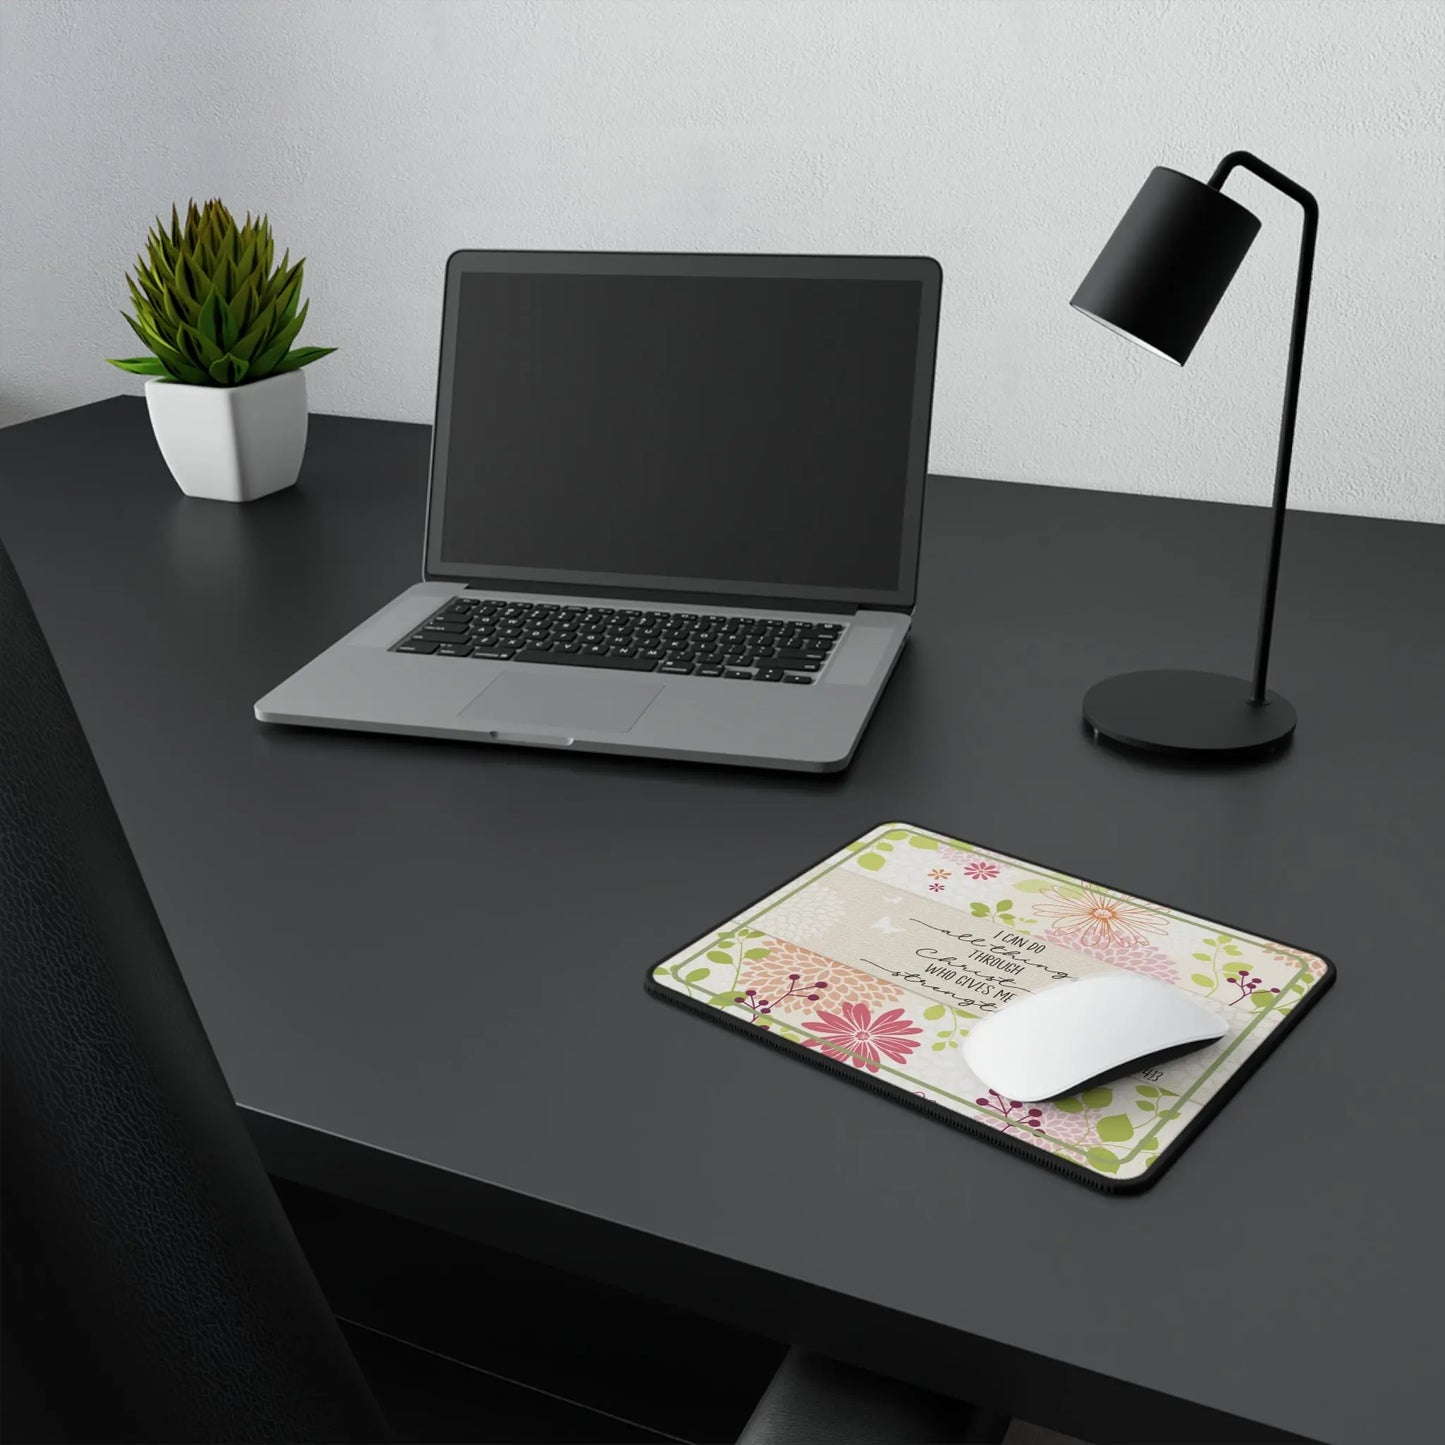 I Can do All Things Non-Slip Mouse Pad Printify